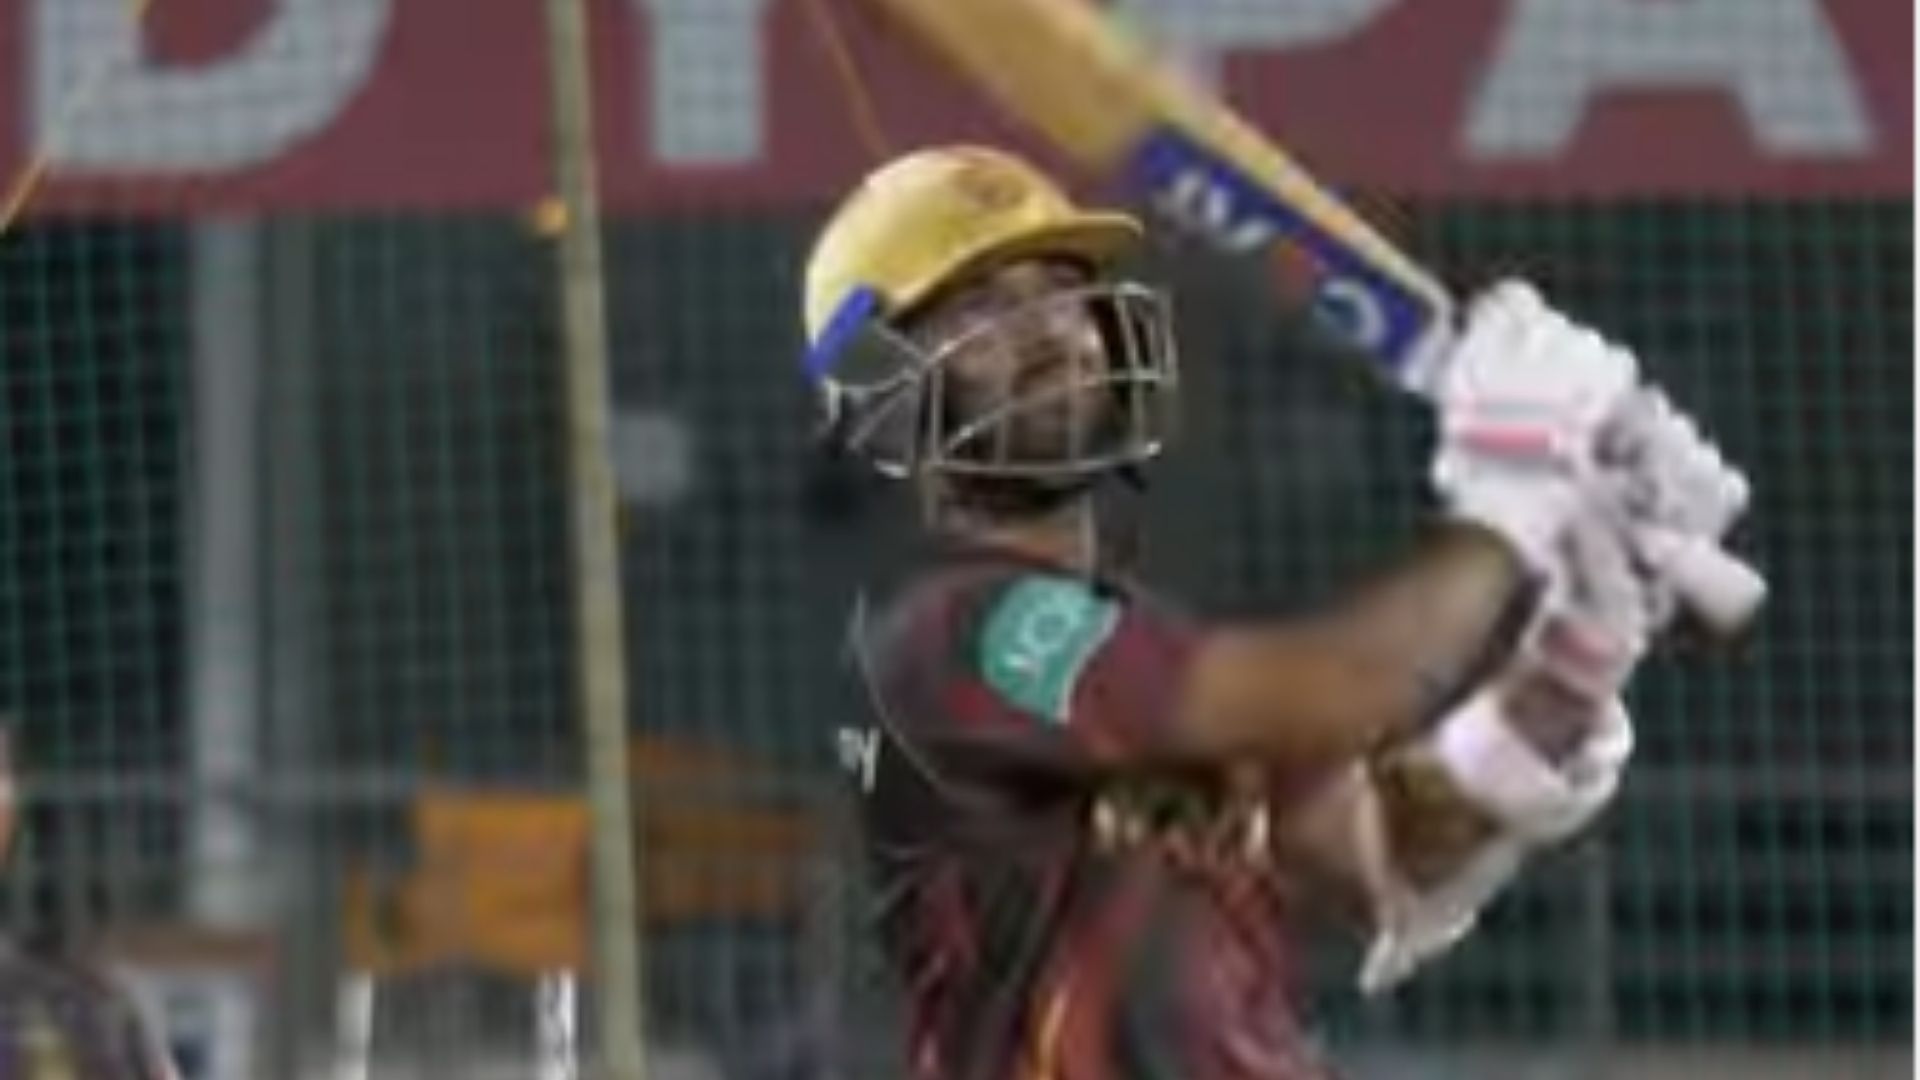 Ajinkya Rahane looked in decent touch in the nets for KKR